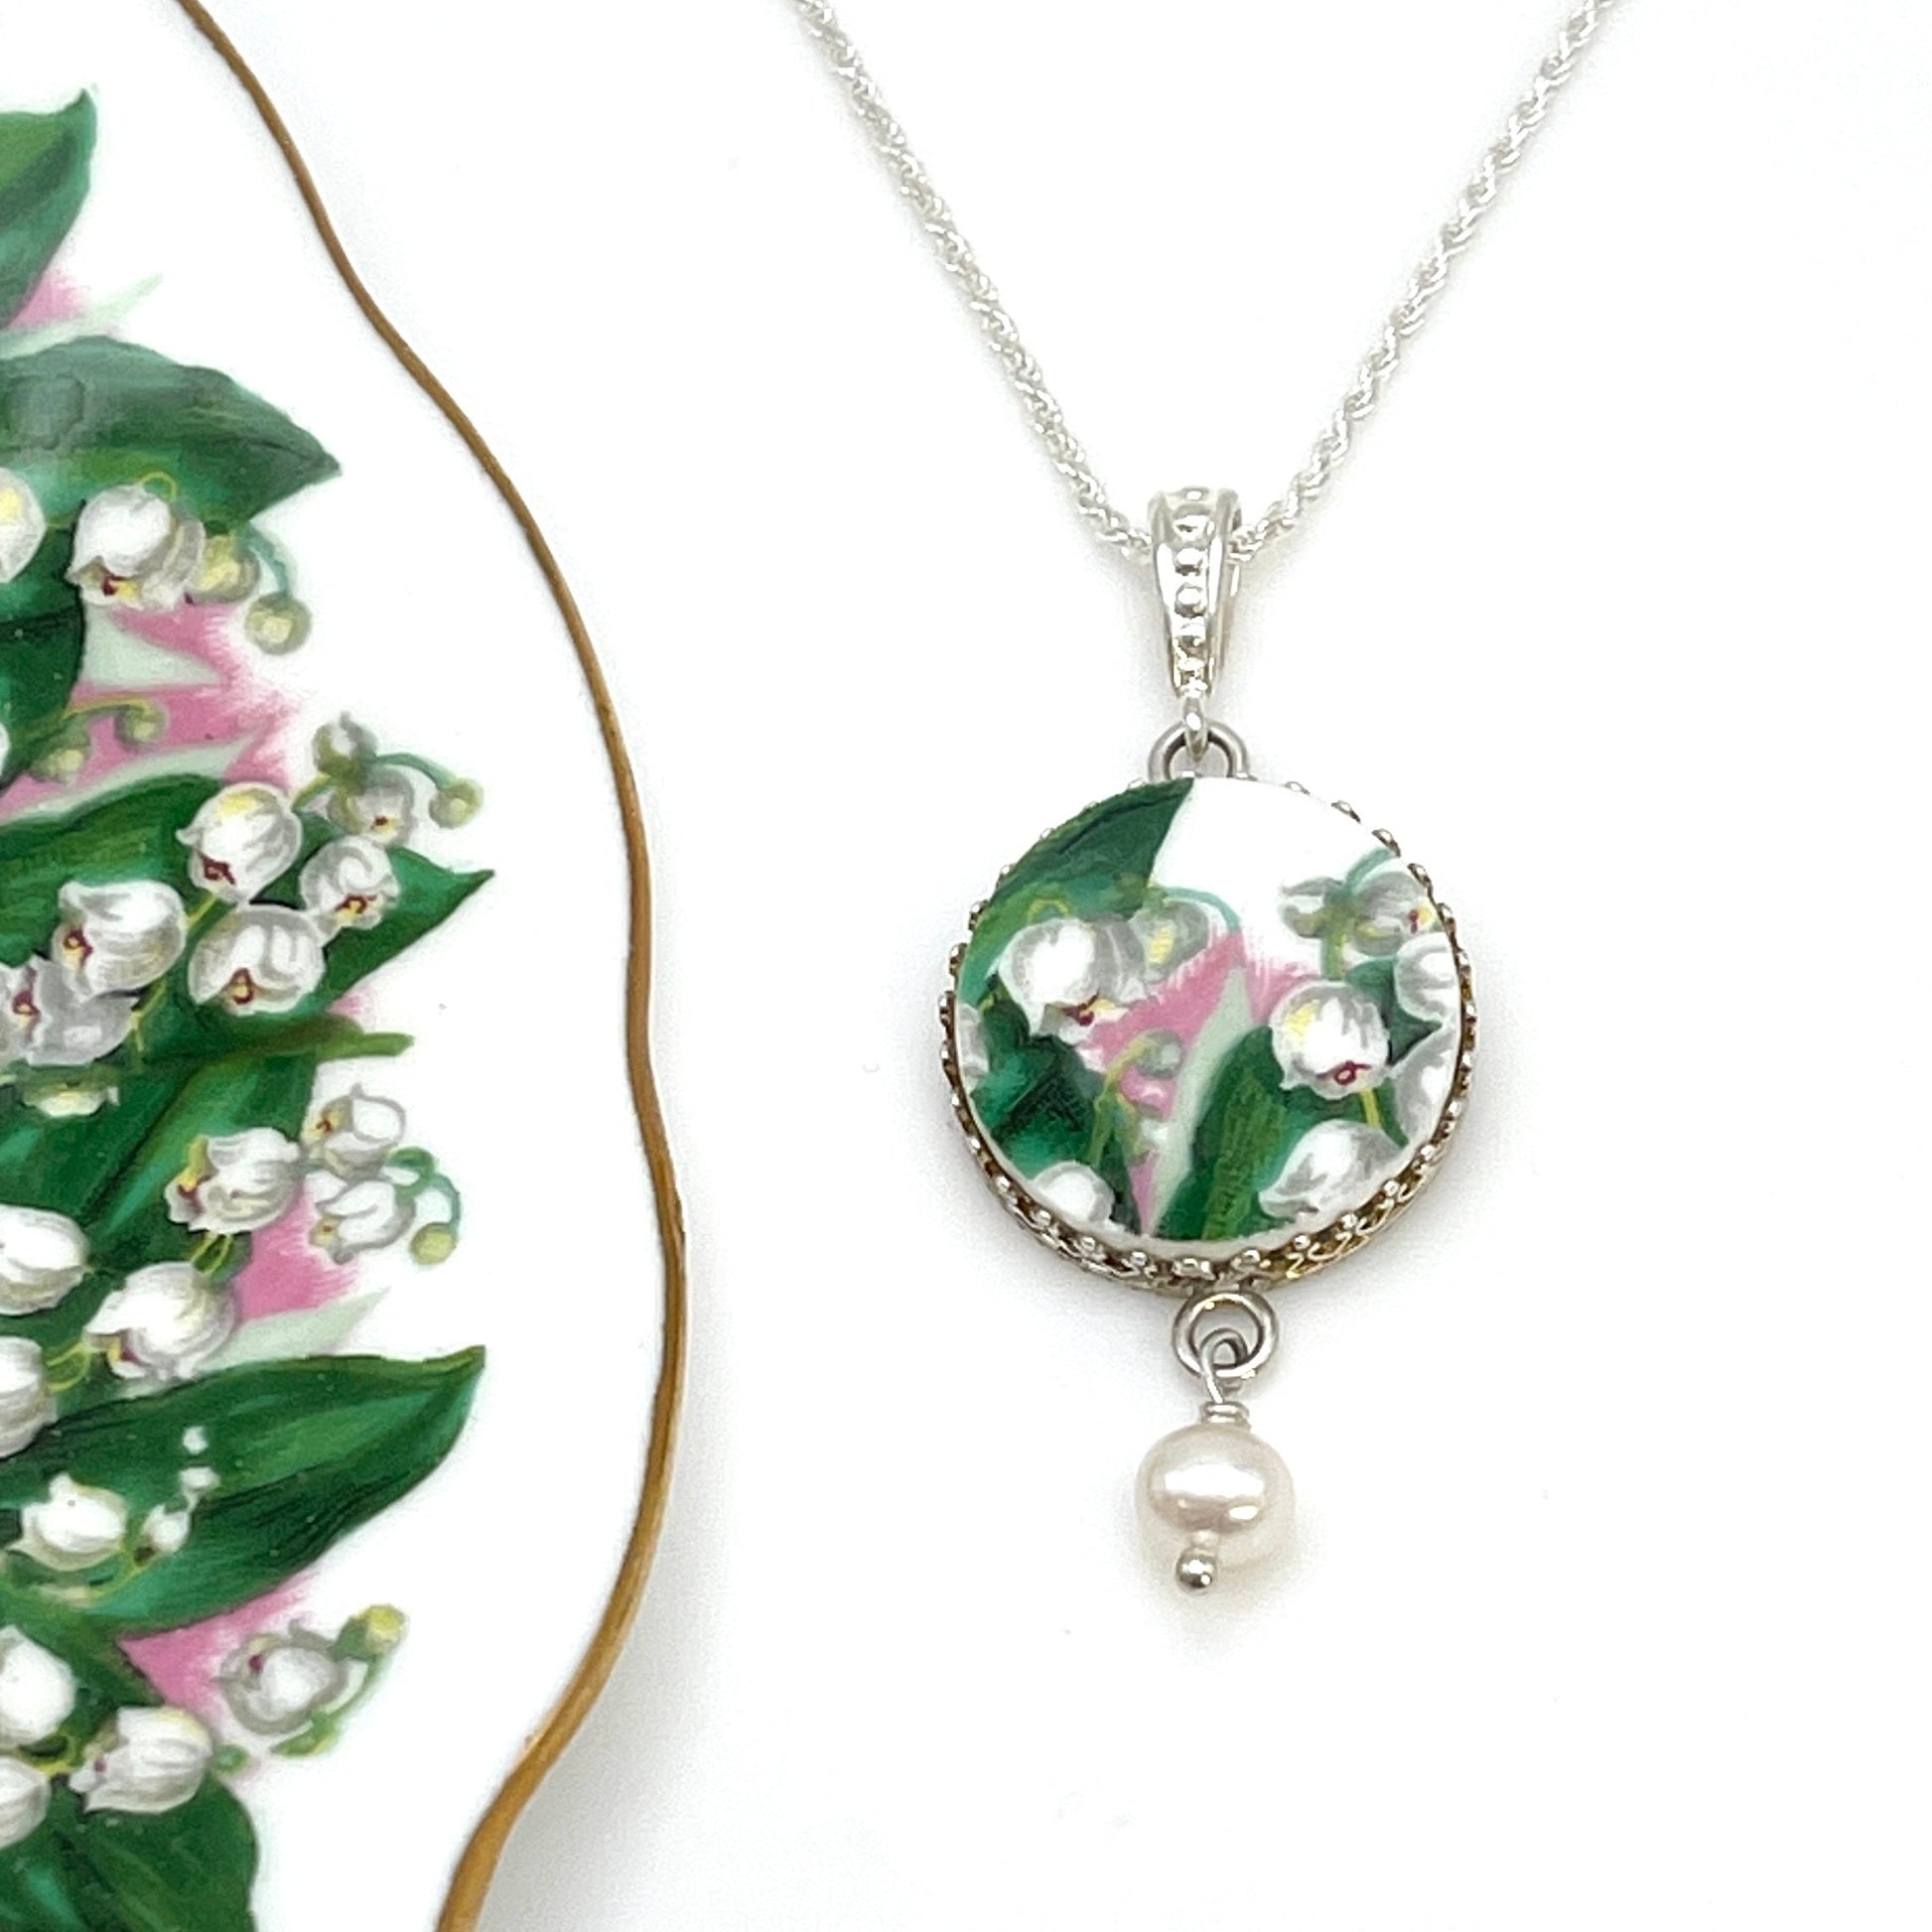 Porcelain Lily of the Valley Necklace, Broken China Jewelry, Unique 18th Anniversary Gifts, Gift for Wife